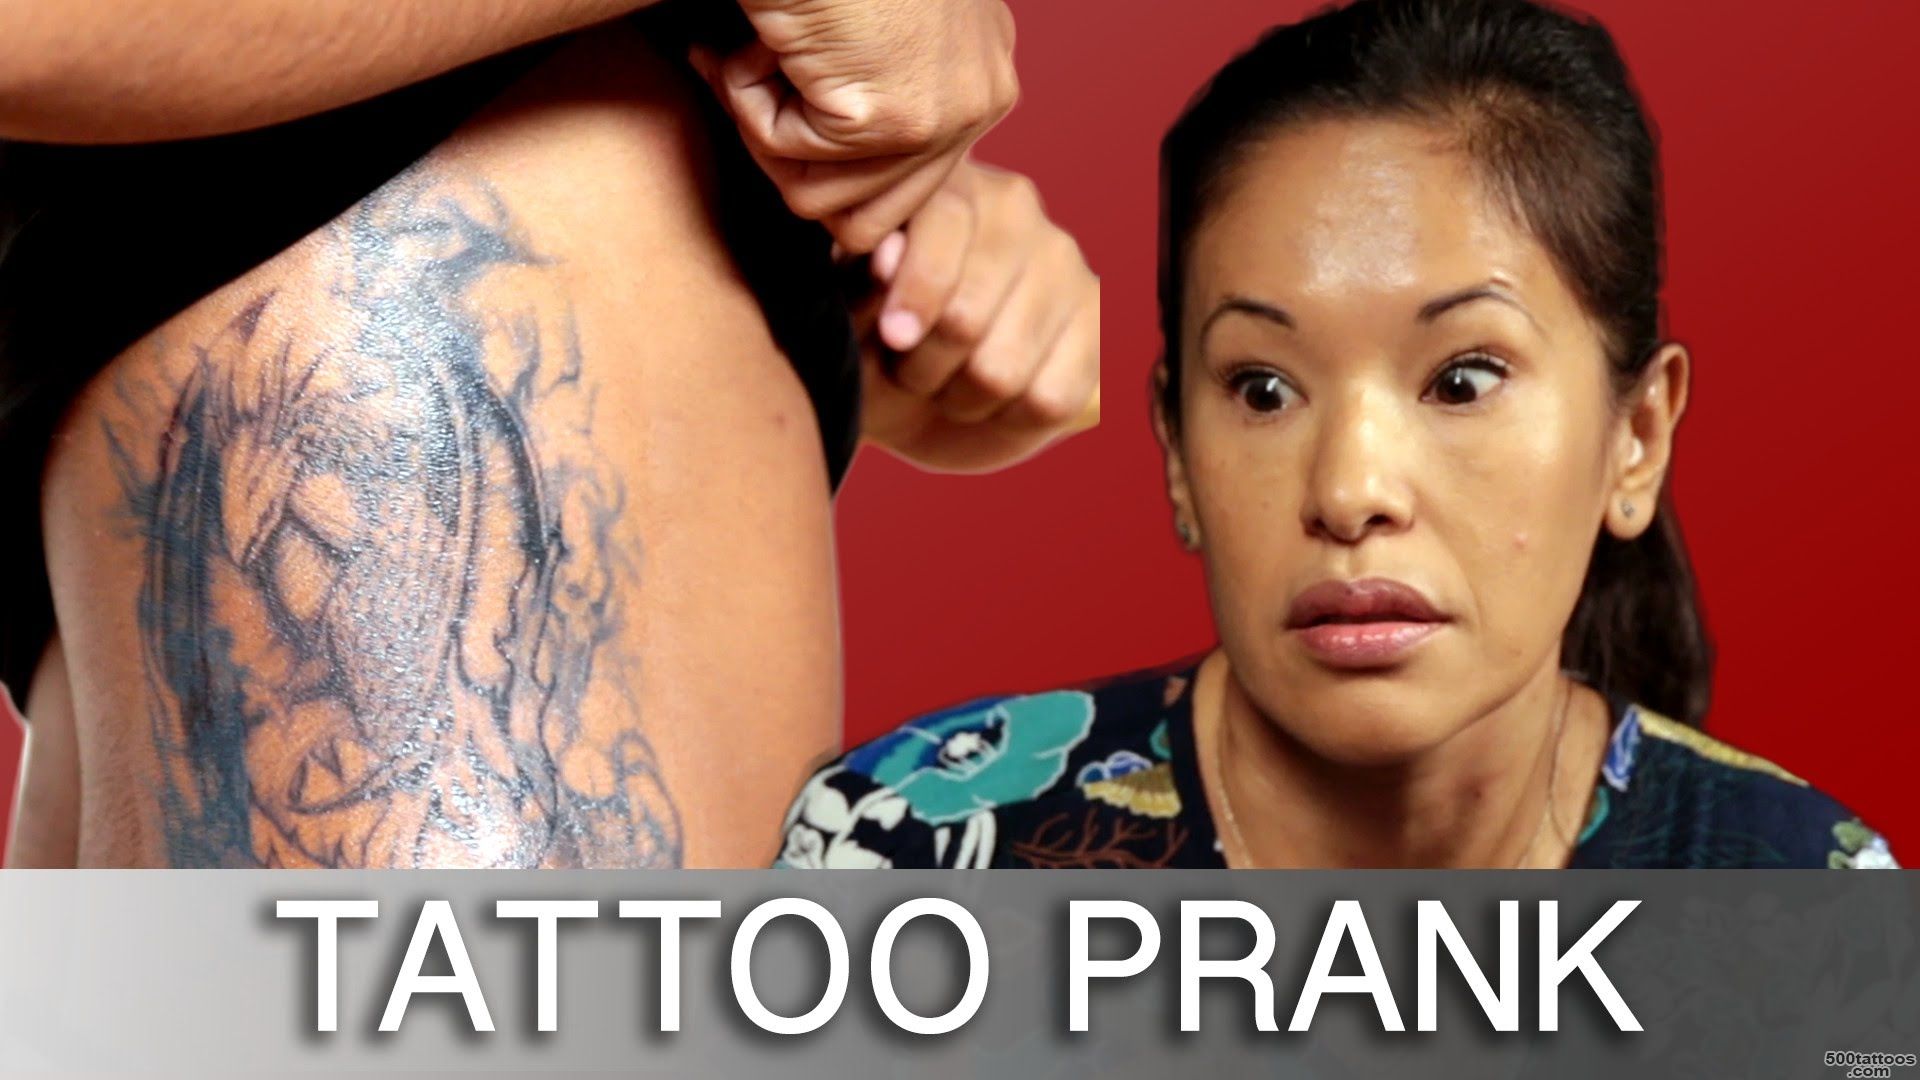 Sons Prank Parents With Tattoos   YouTube_49